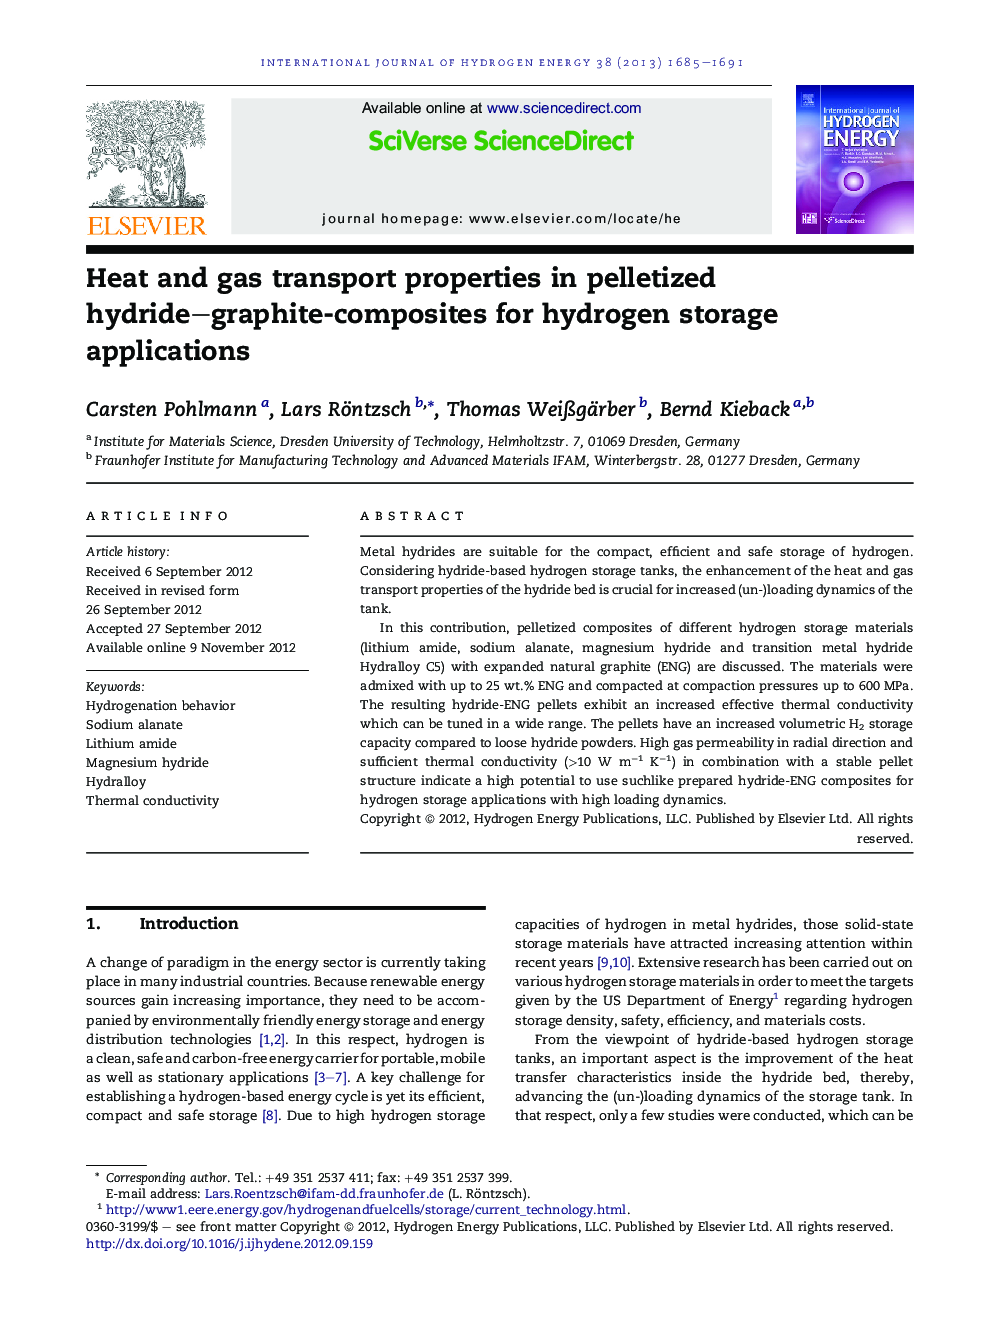 Heat and gas transport properties in pelletized hydride–graphite-composites for hydrogen storage applications